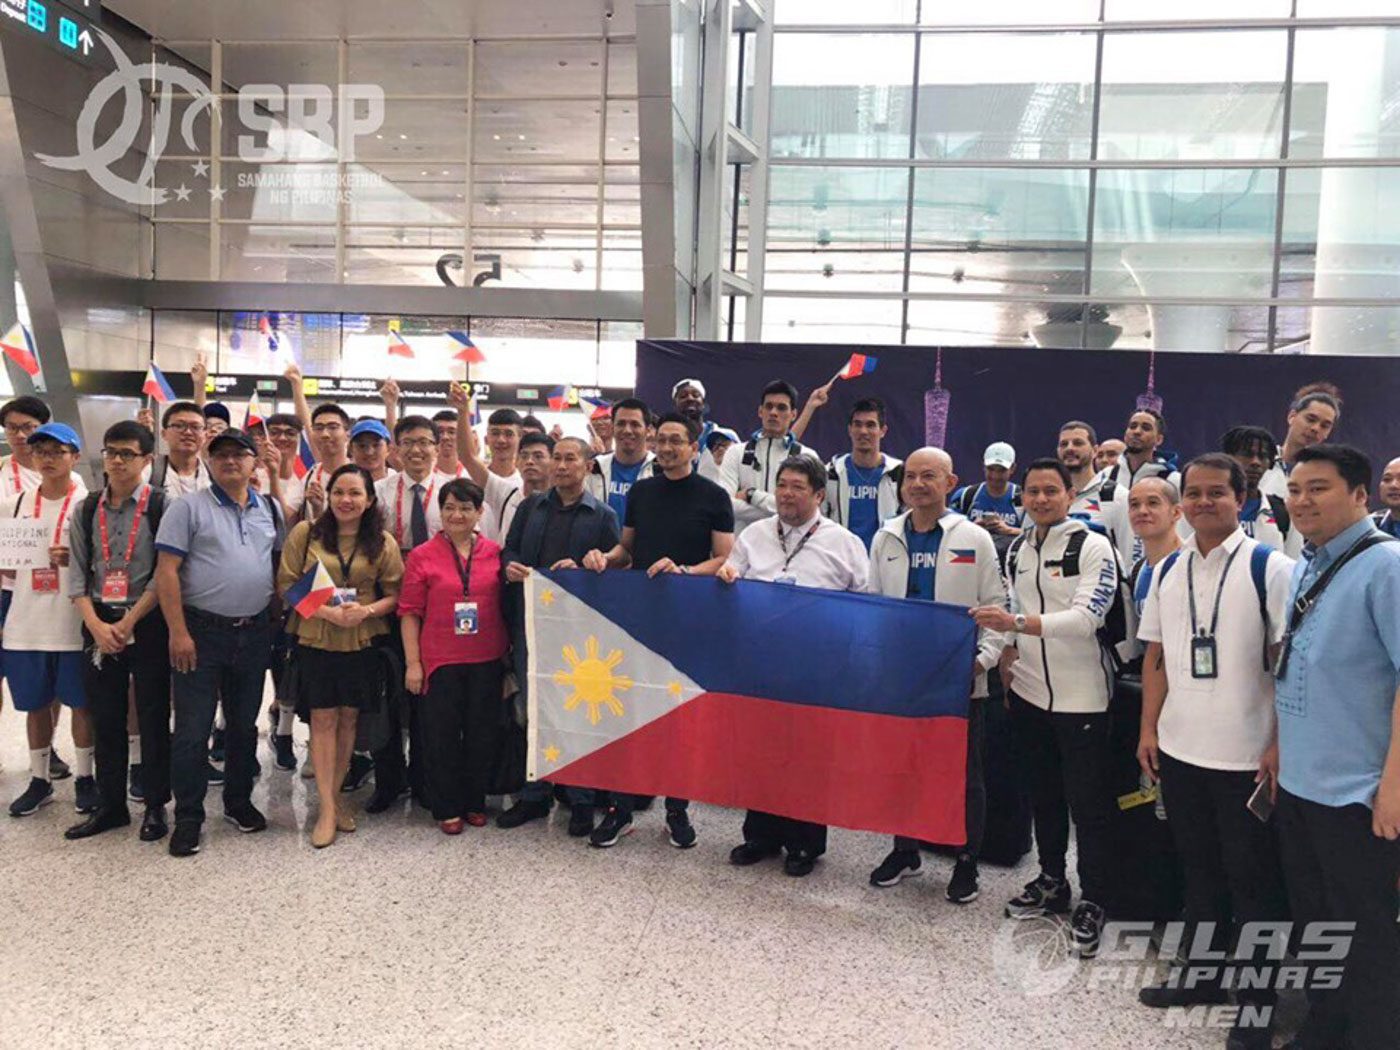 LOOK: Gilas Pilipinas lands in China for FIBA World Cup 2019